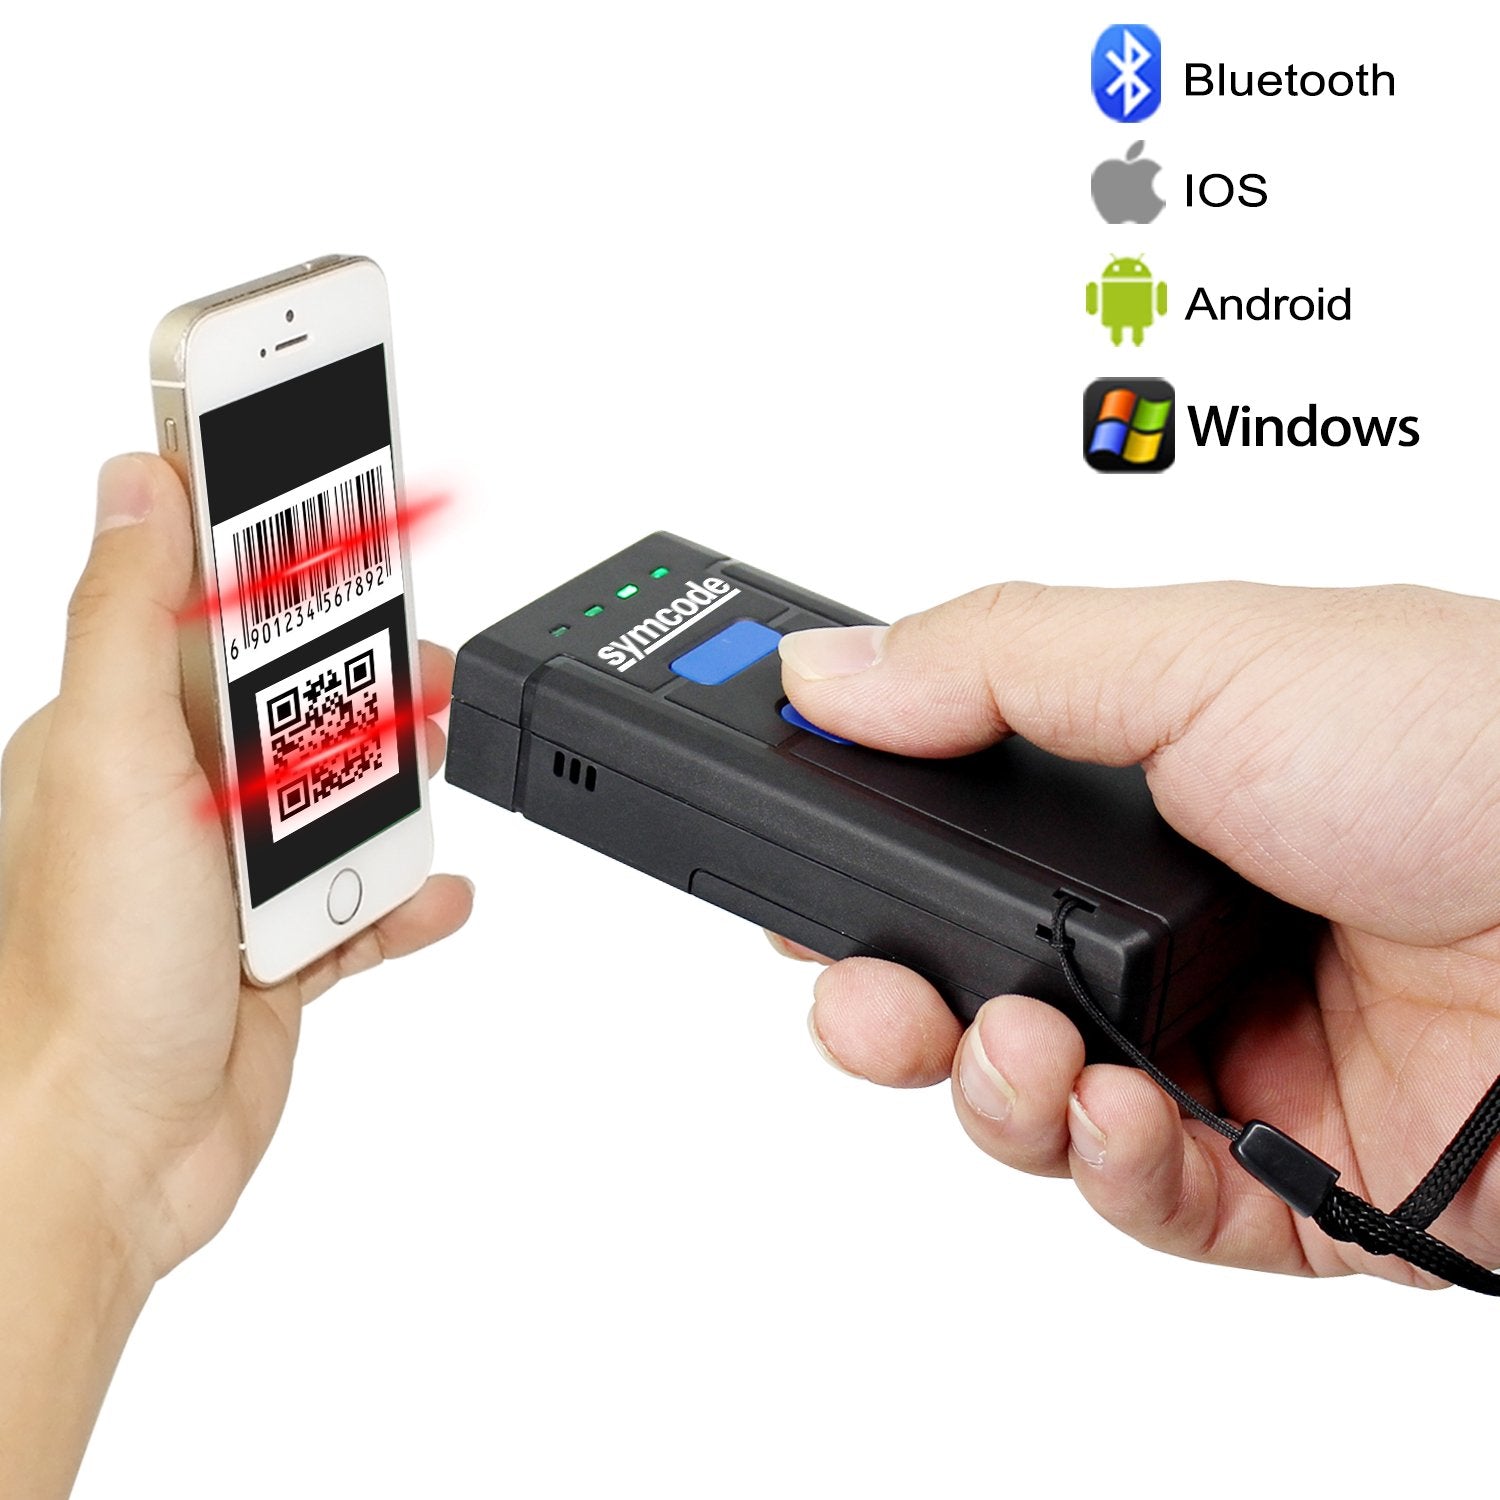 Symcode 1D 2D QR Mini Bluetooth Barcode Scanner, with Bluetooth 4.0 & 2.4G Wireless Connection, Portable Barcode Reader Compatible with Laptops/PC/Android/iPhone iOS/Tablet for QR PDF417 Dat